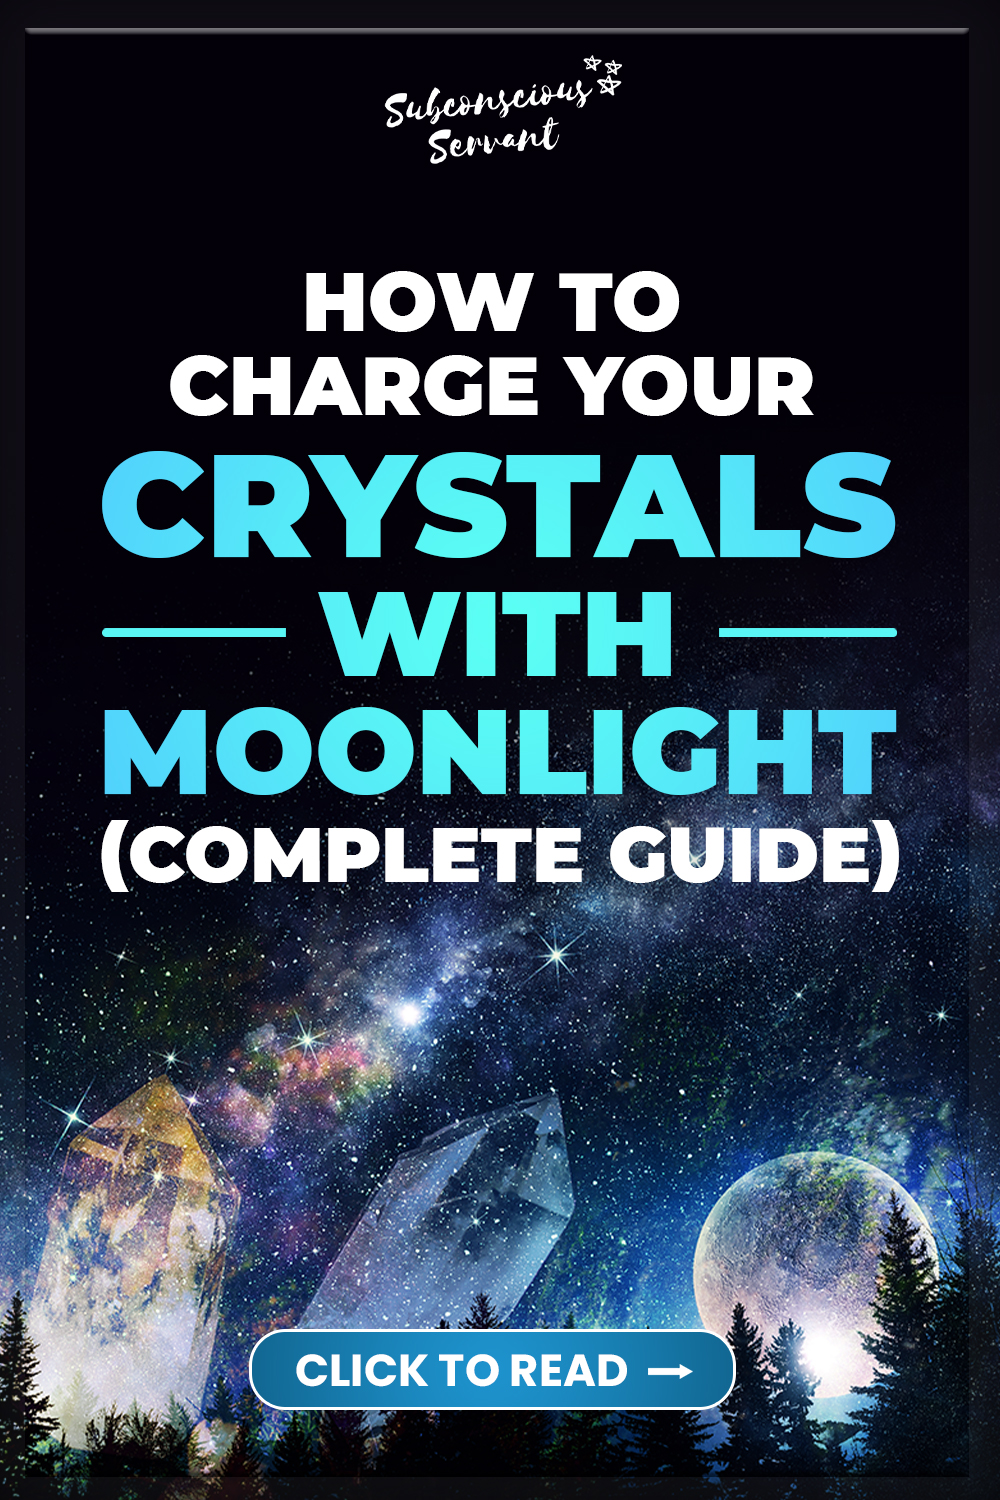 How To Charge Your Crystals With Moonlight (Complete Guide)